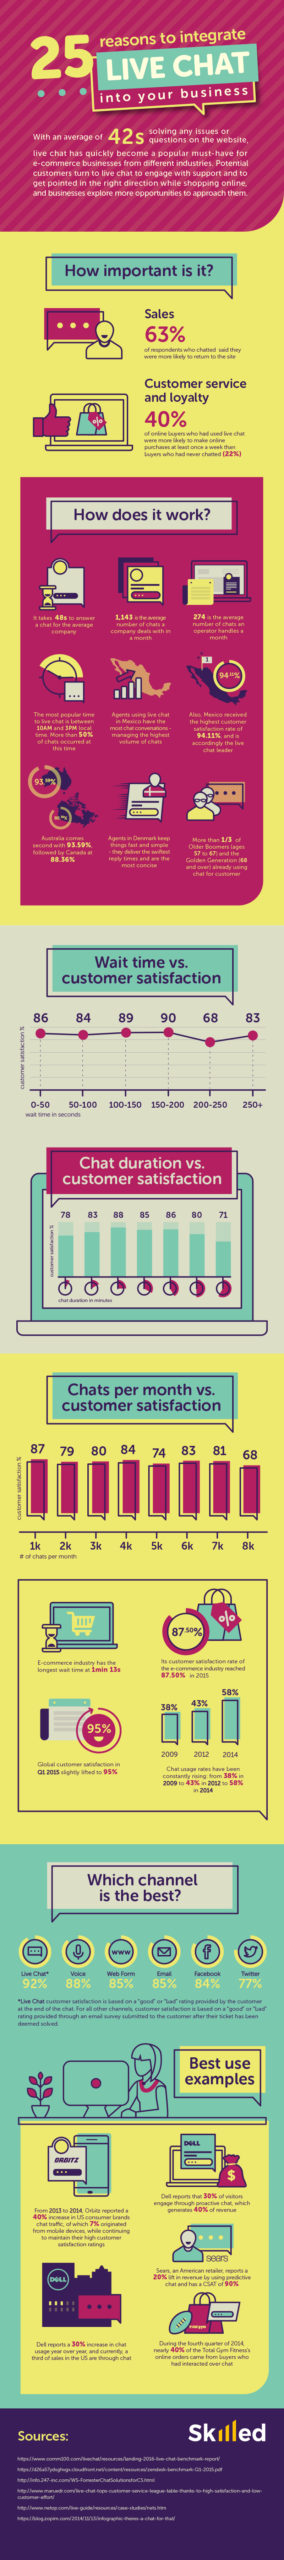 Benefits of live chat - infographic